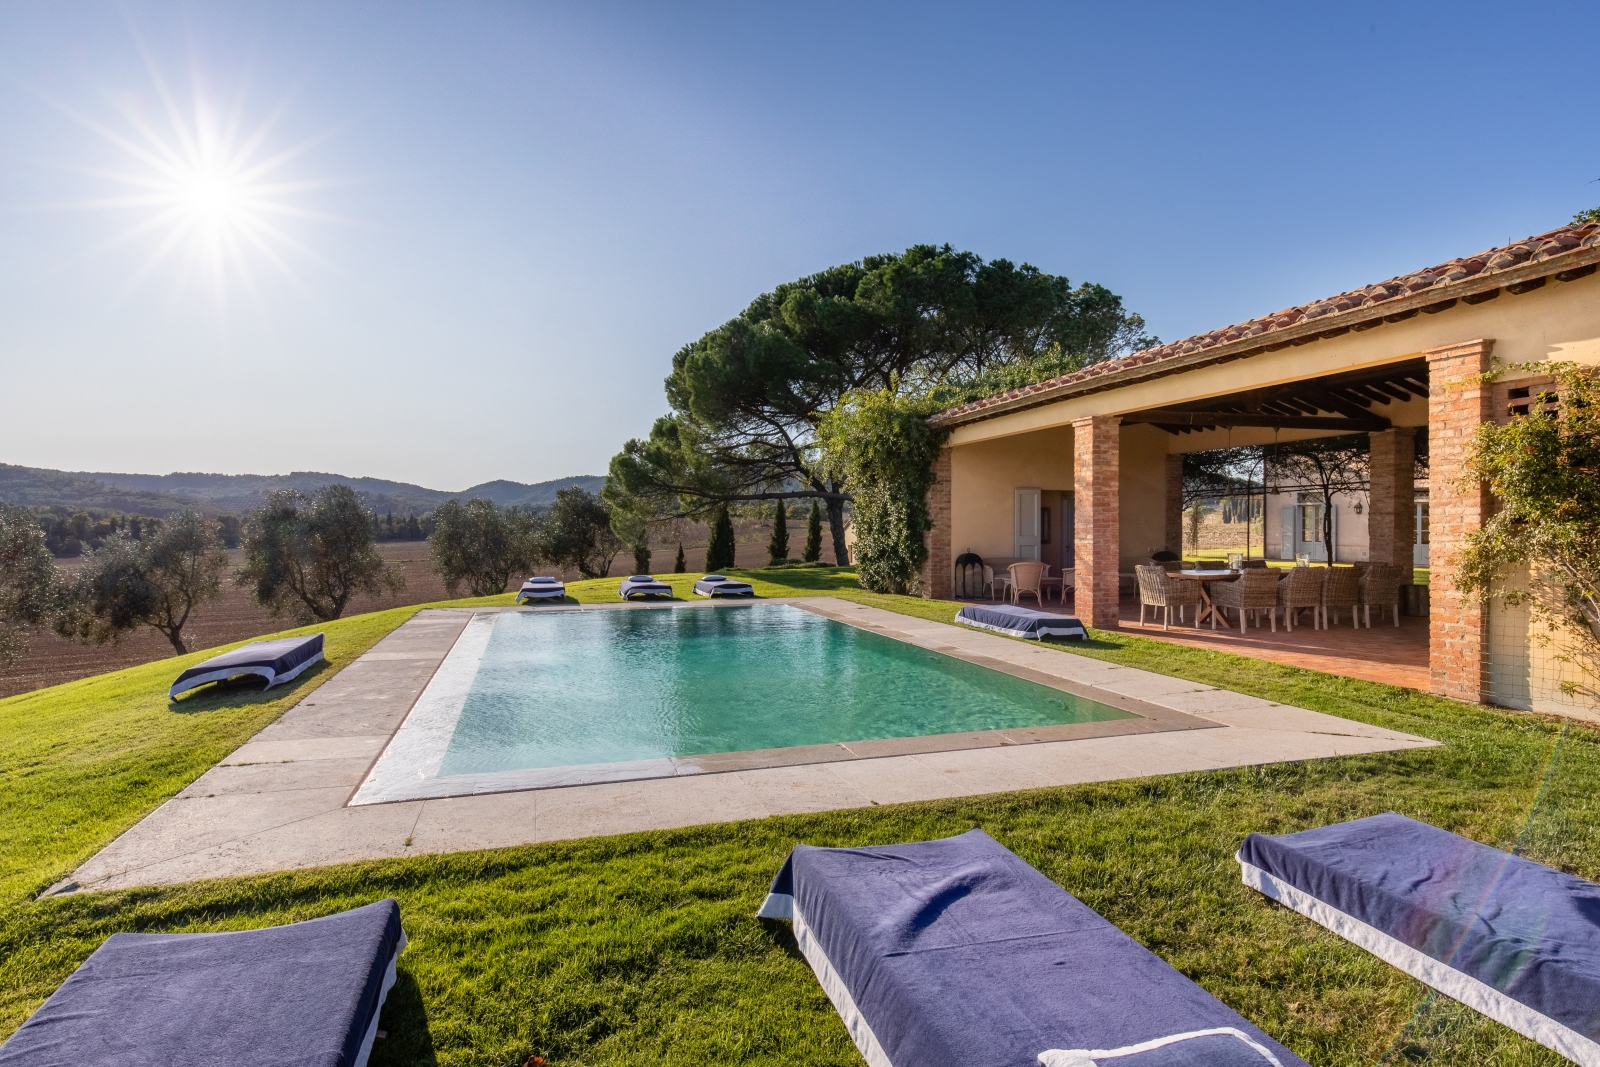 Pool area with sun loungers and covered outdoor dining area in garden at La Vigna in Tuscany, Italy